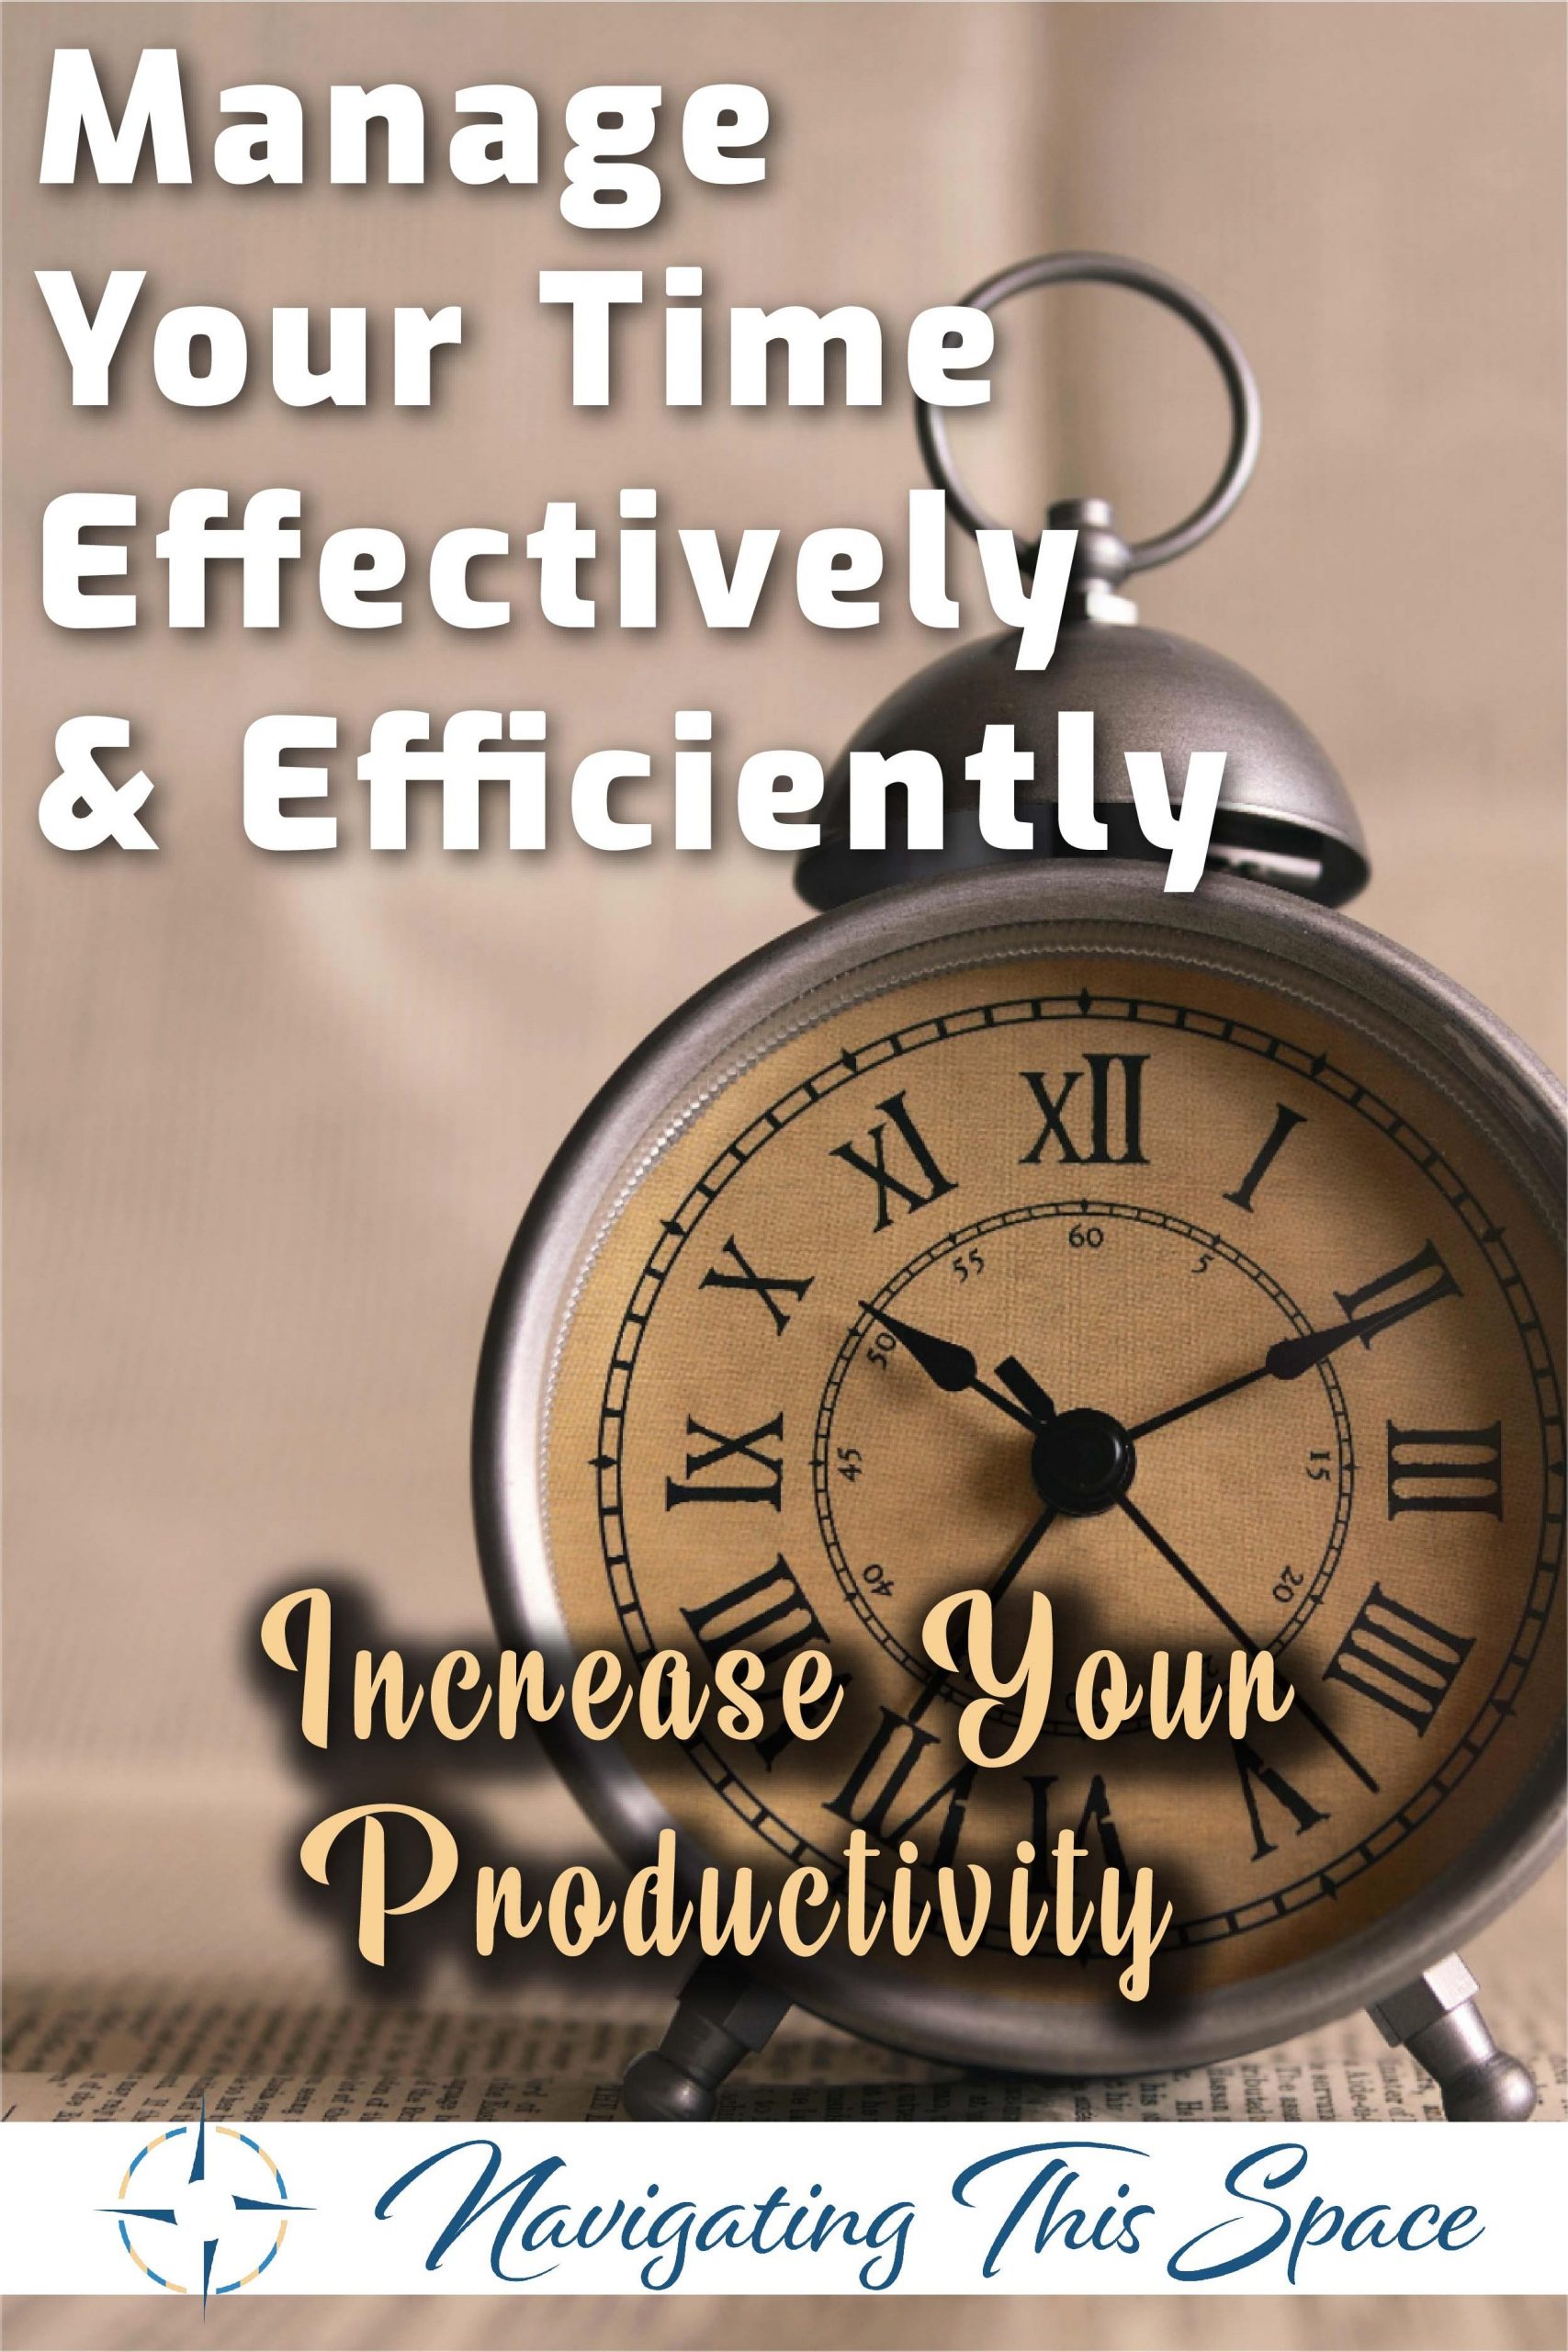 Manage your time effectively and efficiently